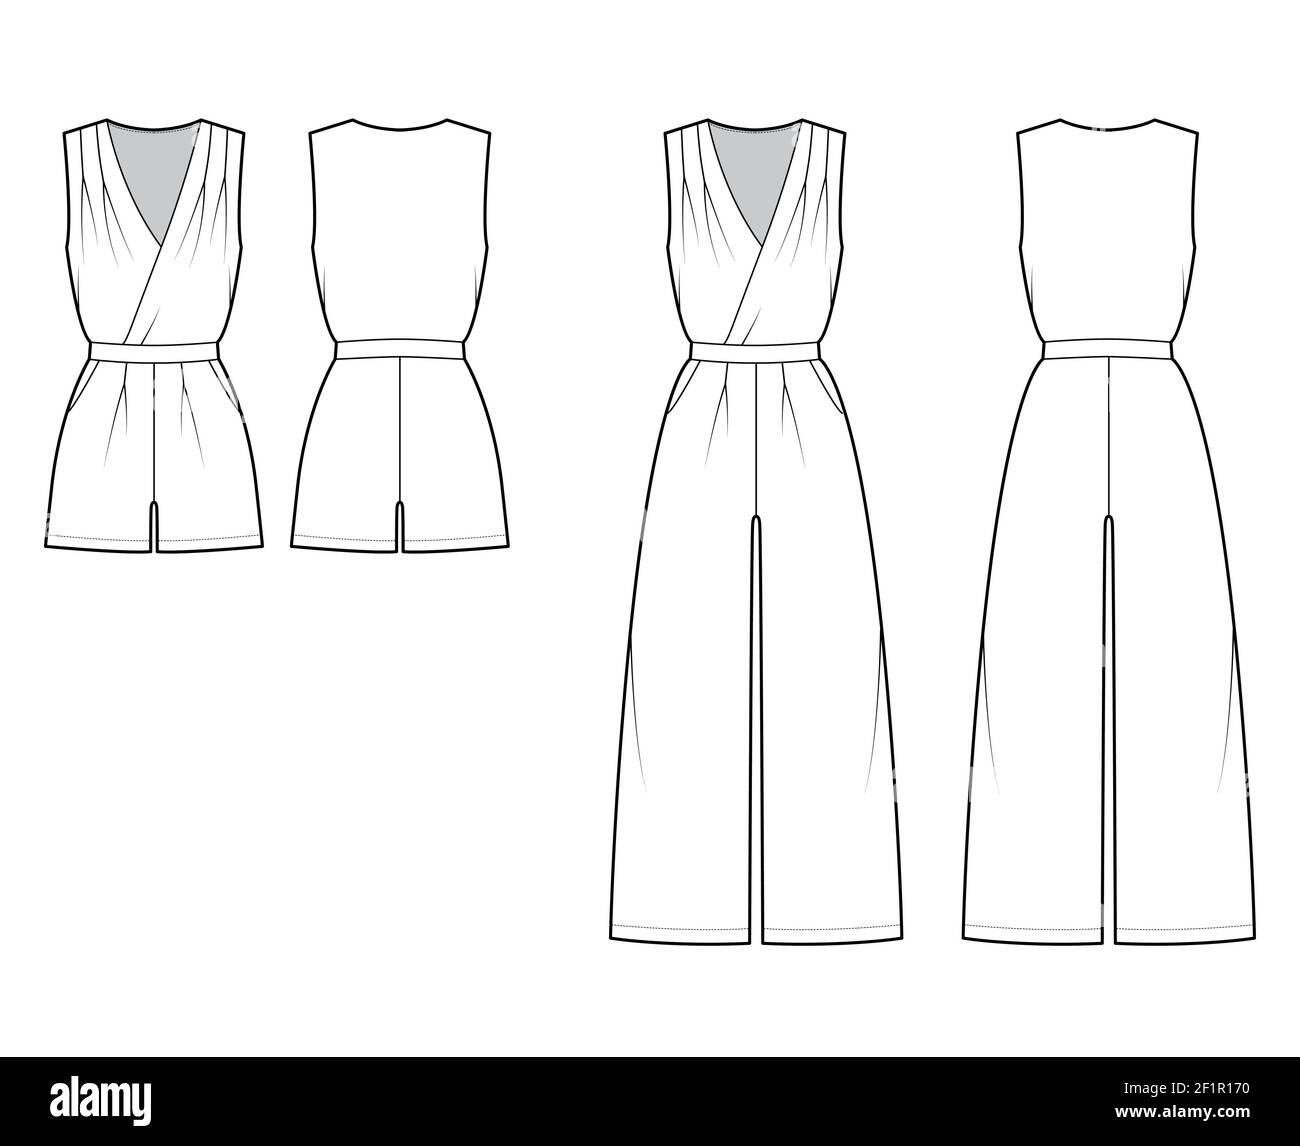 Set of playsuits romper overall jumpsuit technical fashion illustration with full mini length, normal waist, high rise, pockets, single pleat. Flat front back, white color. Women men unisex CAD mockup Stock Vector